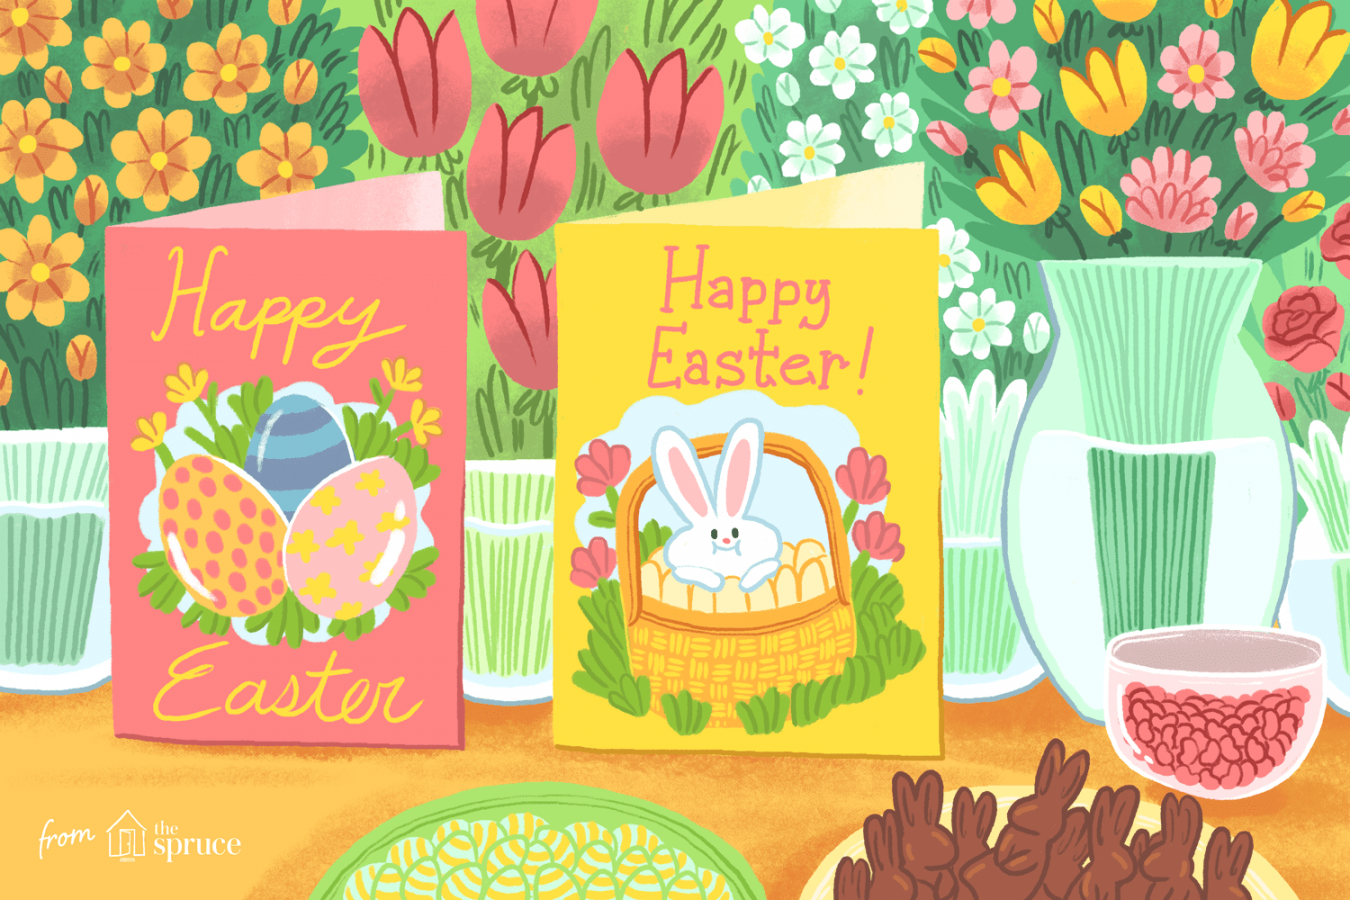 Free Printable Easter Cards - Printable -  Free, Printable Easter Cards for Everyone You Know